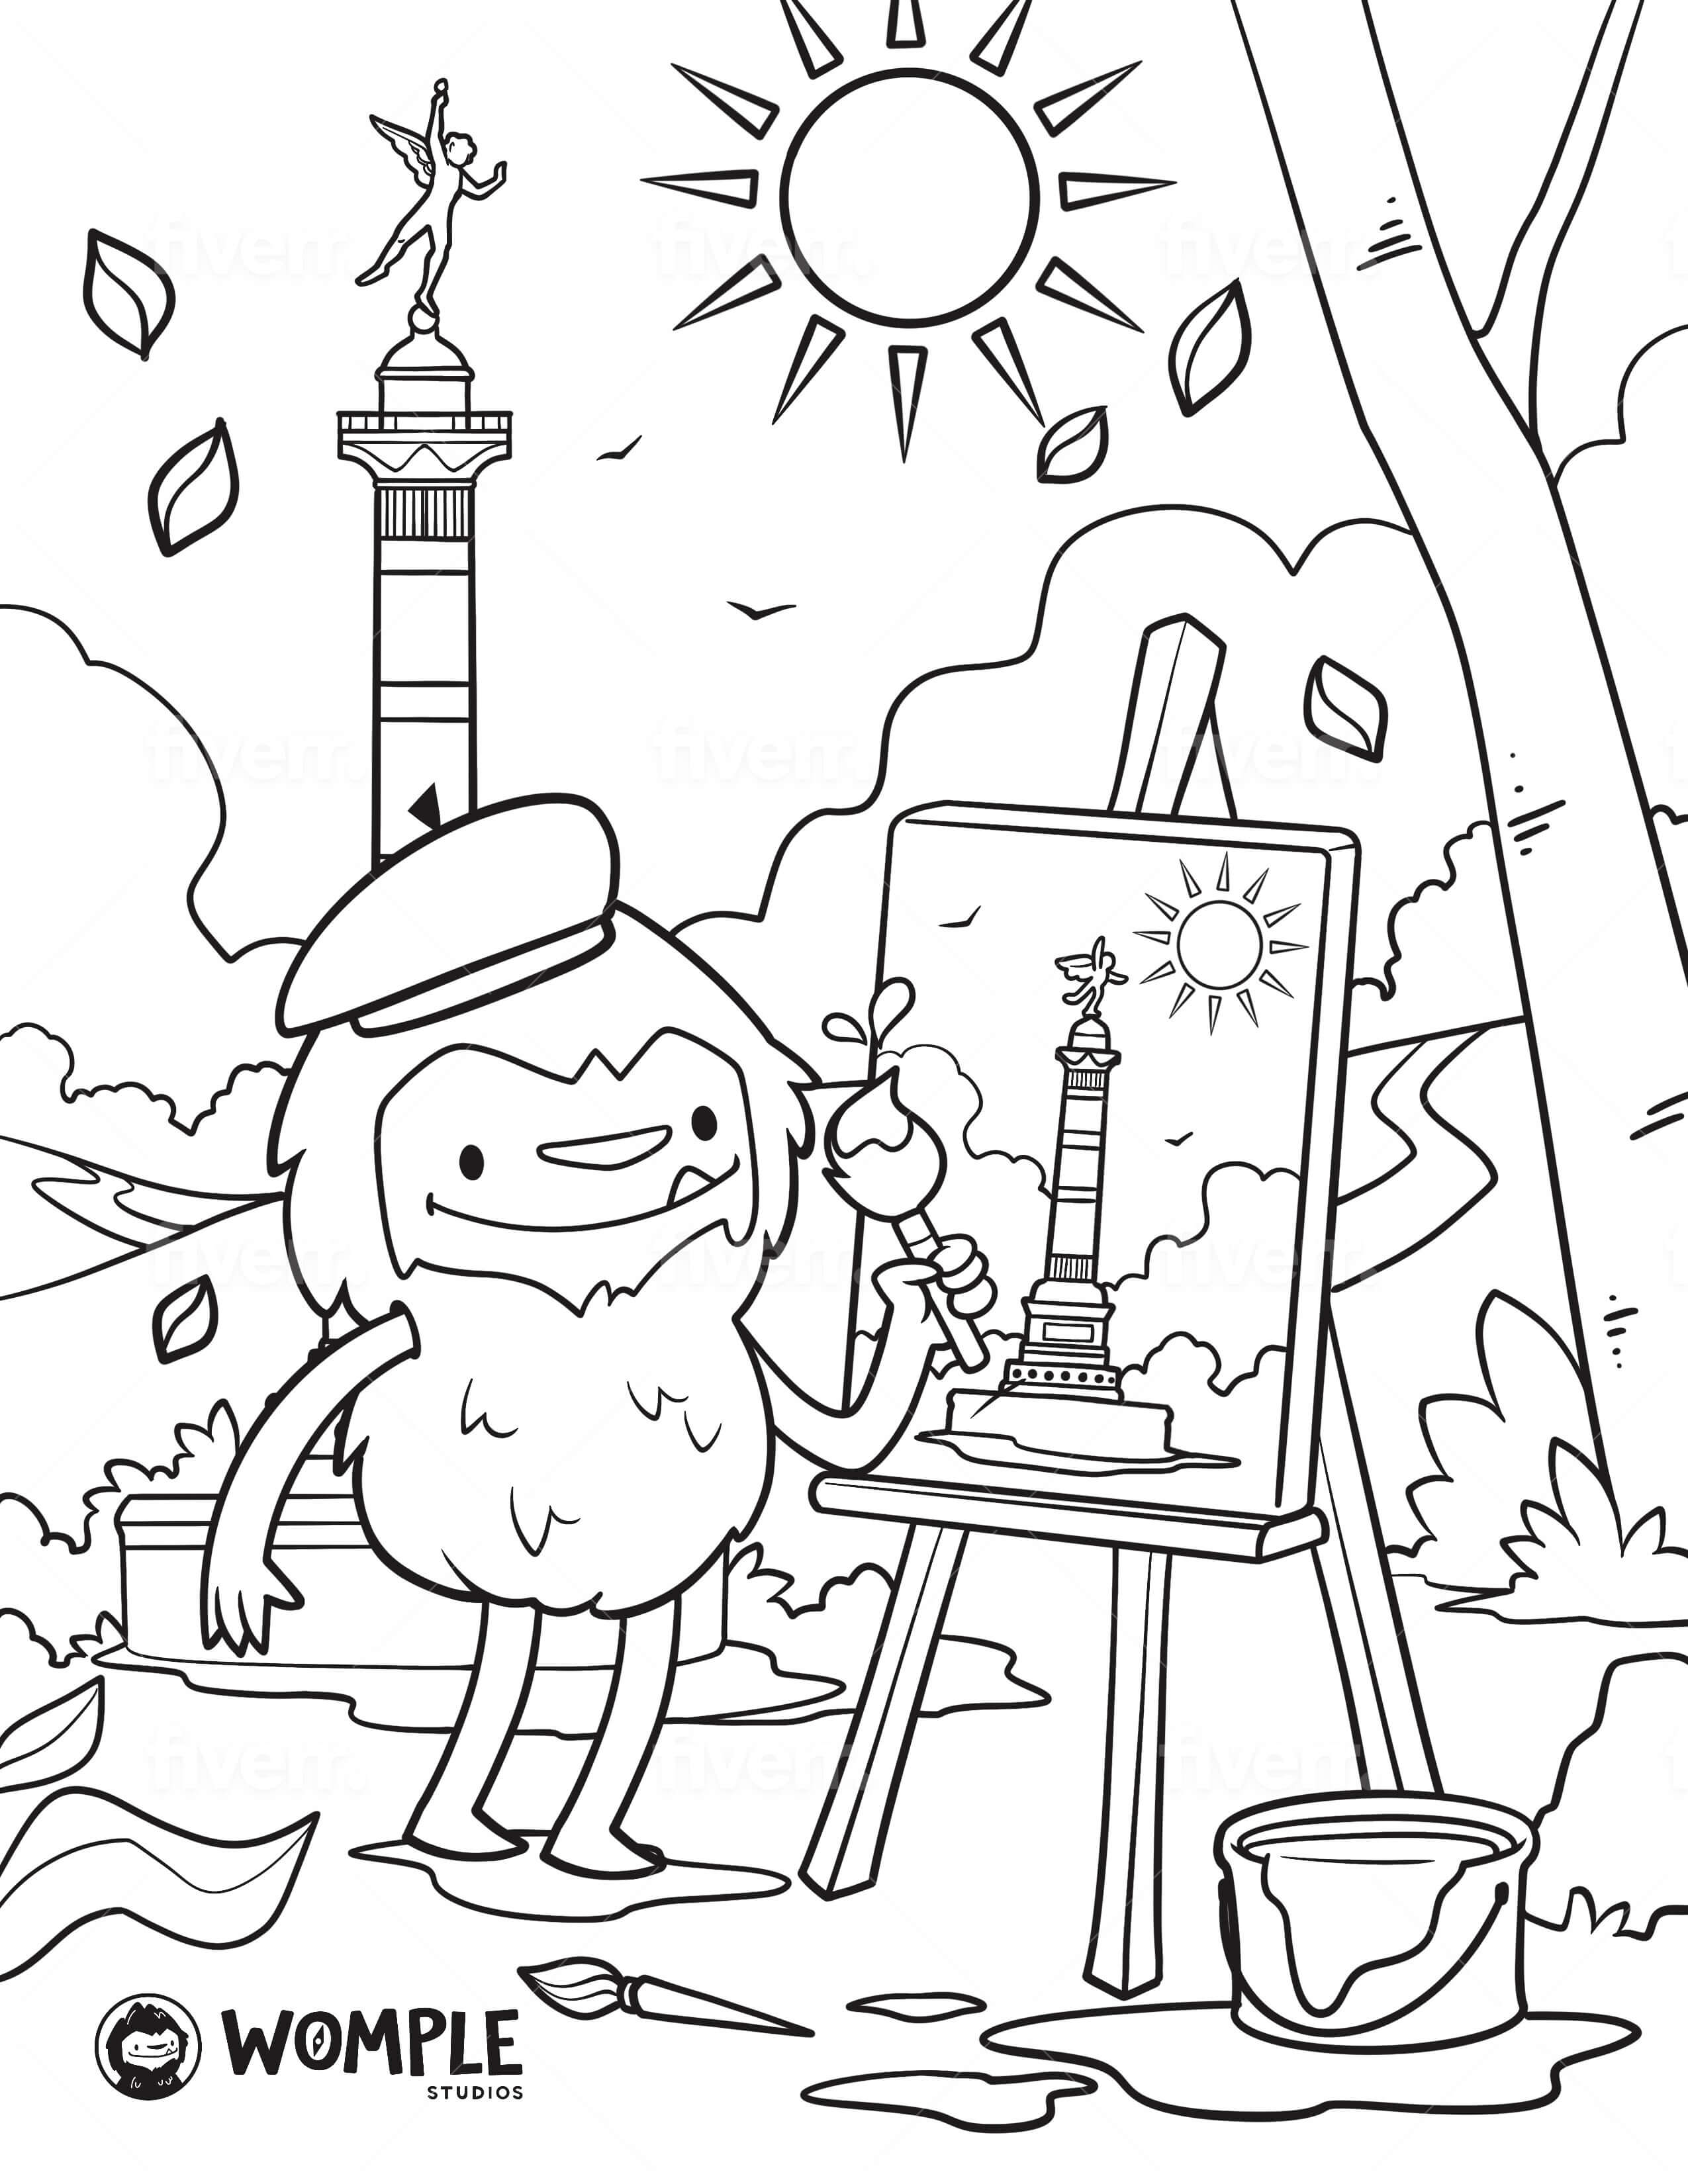 Womple studios bastille day coloring page